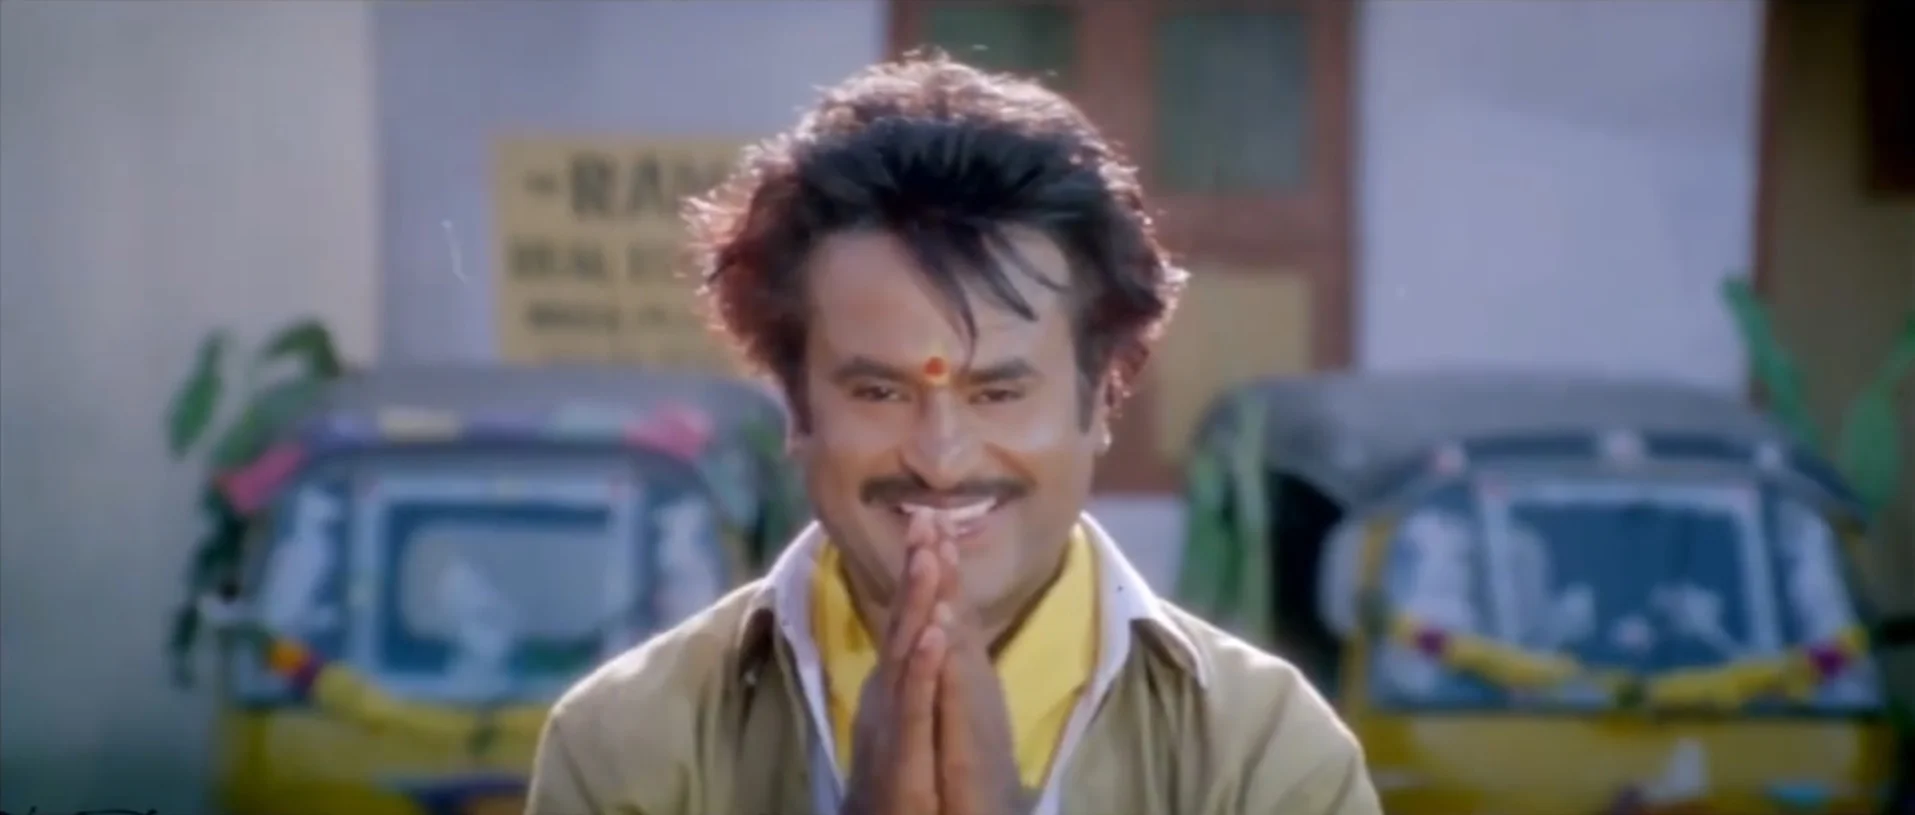 Rajinikanth For the Love of a Man